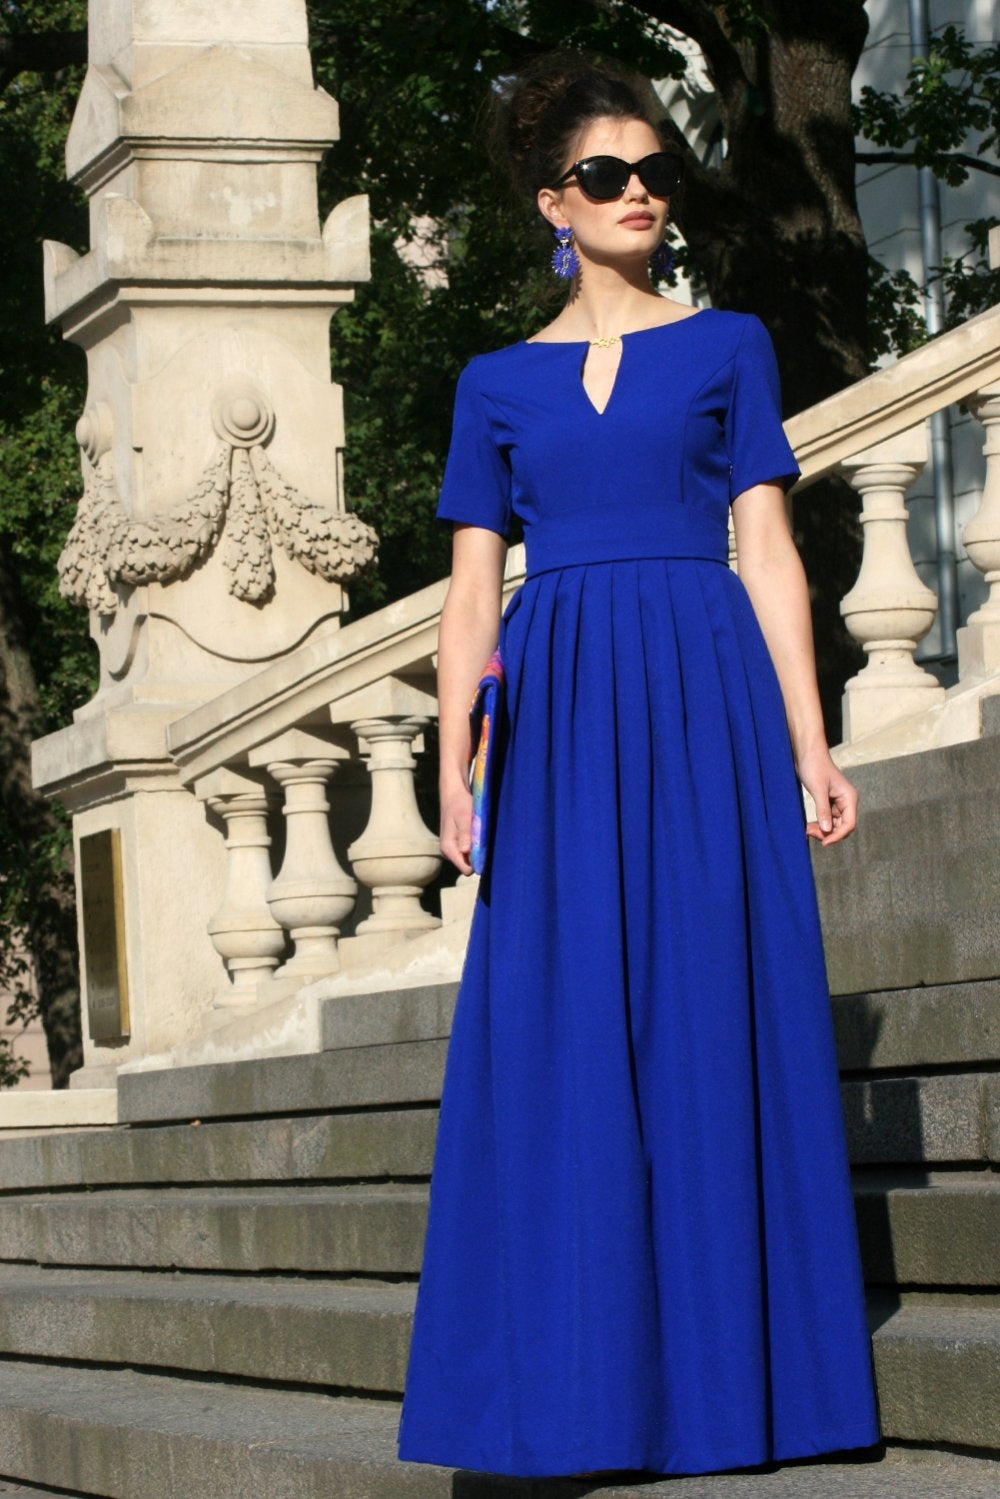 Blue maxi dress with folds and belt